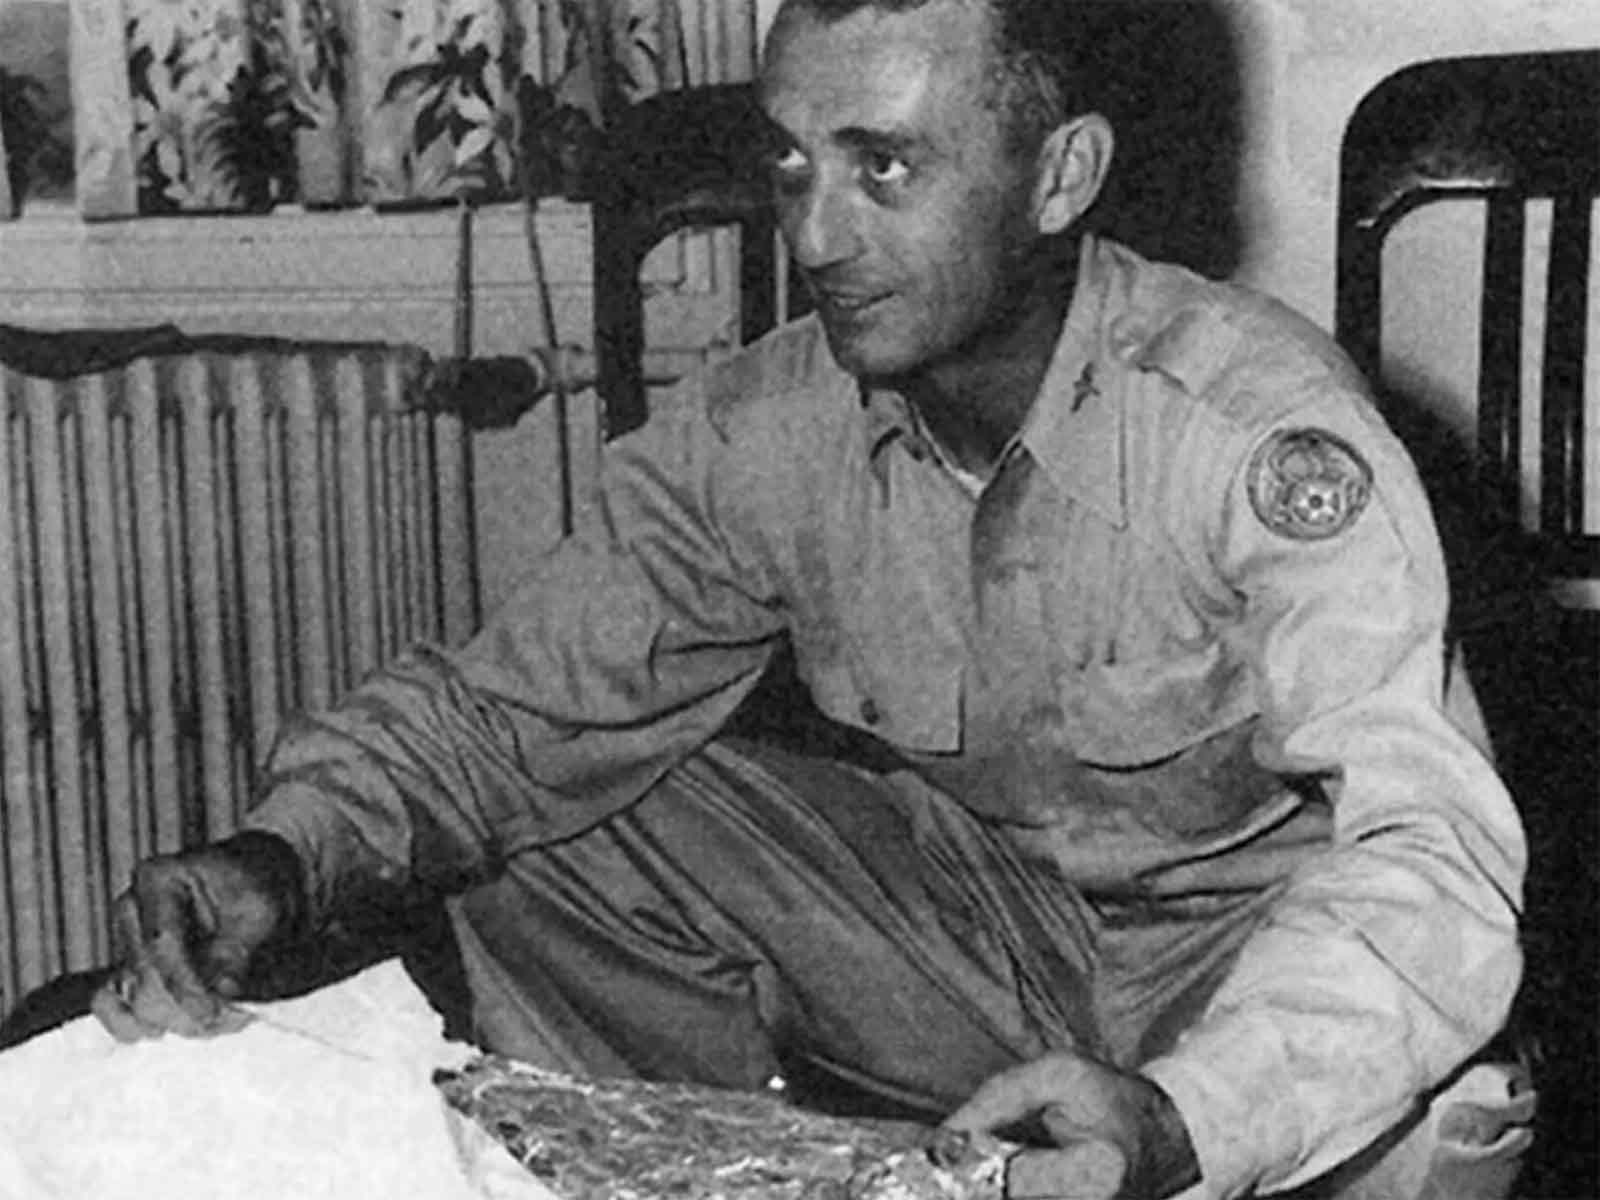 Major Marcel with Roswell Debris